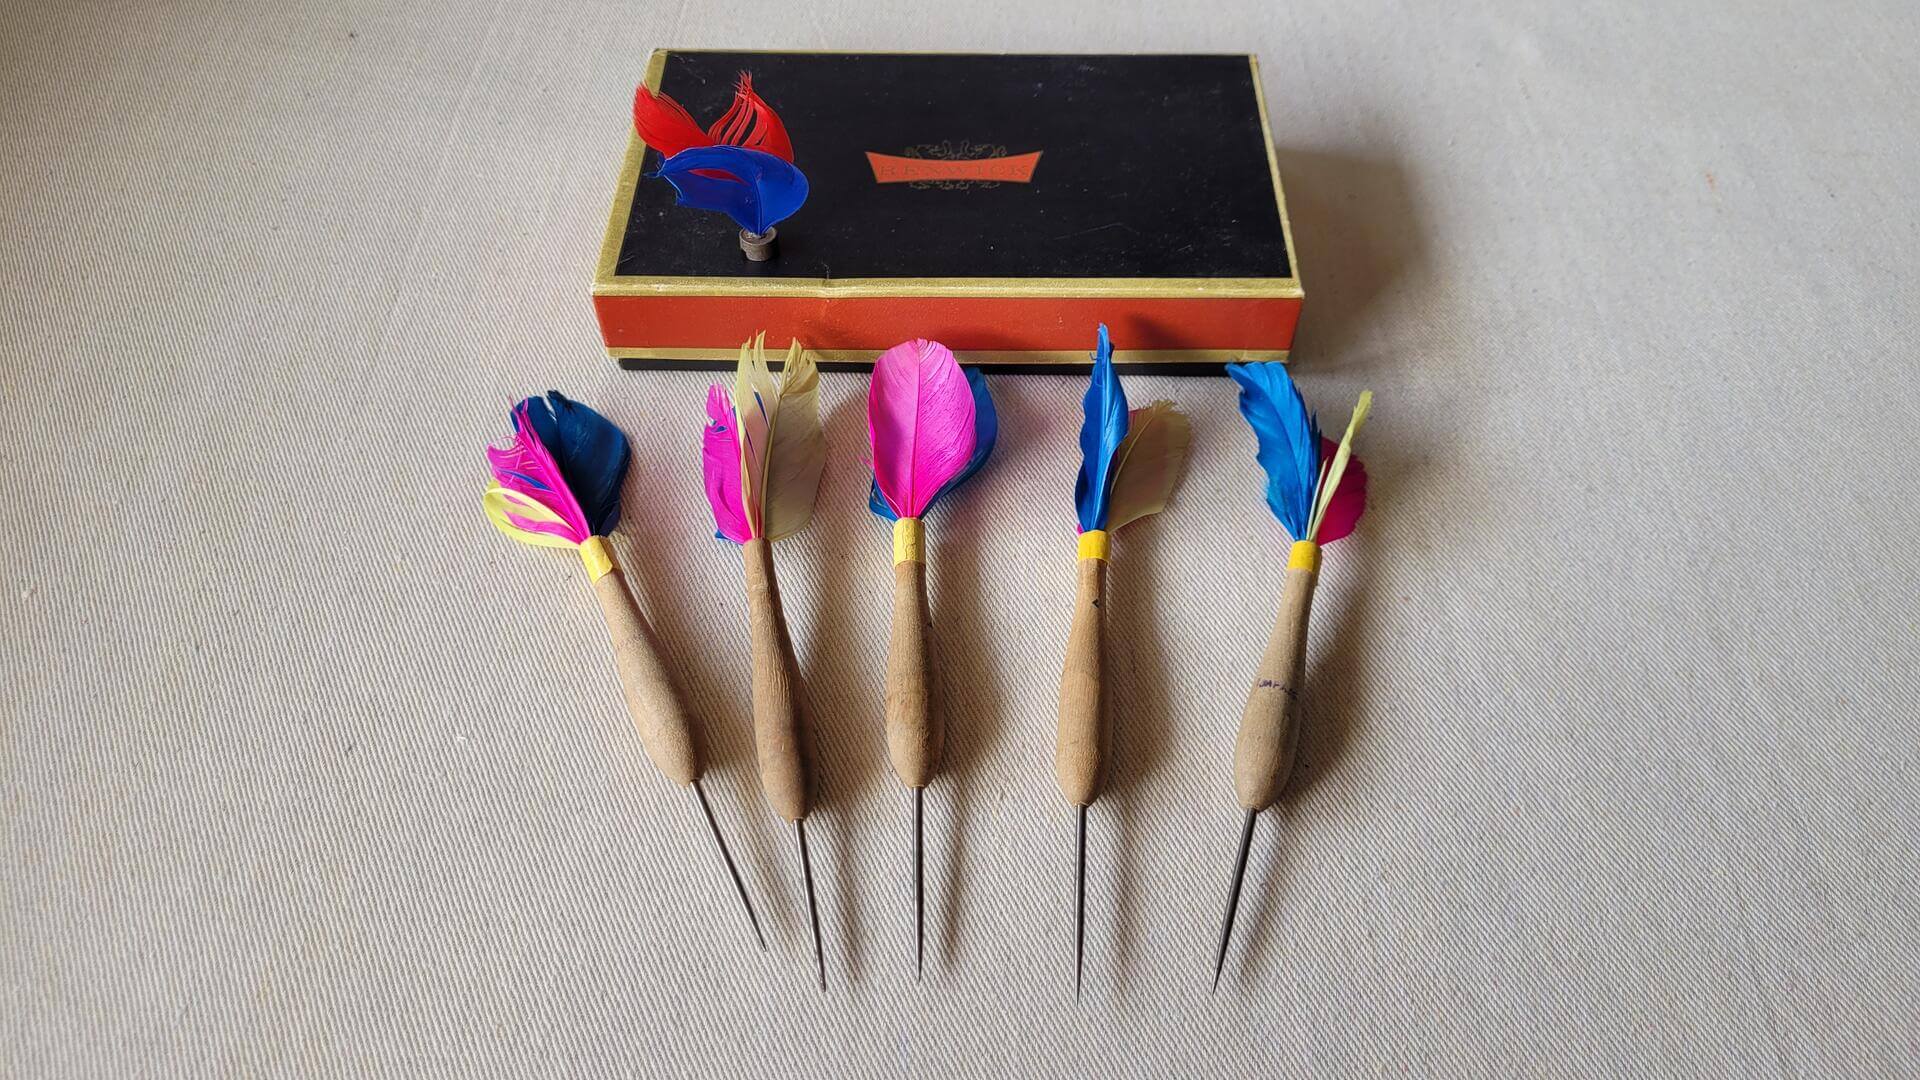 Rare set of 5 mid century wooden shafted natural feather darts with the steel tip. Vintage made in Japan collectible sporting goods & darts memorabilia